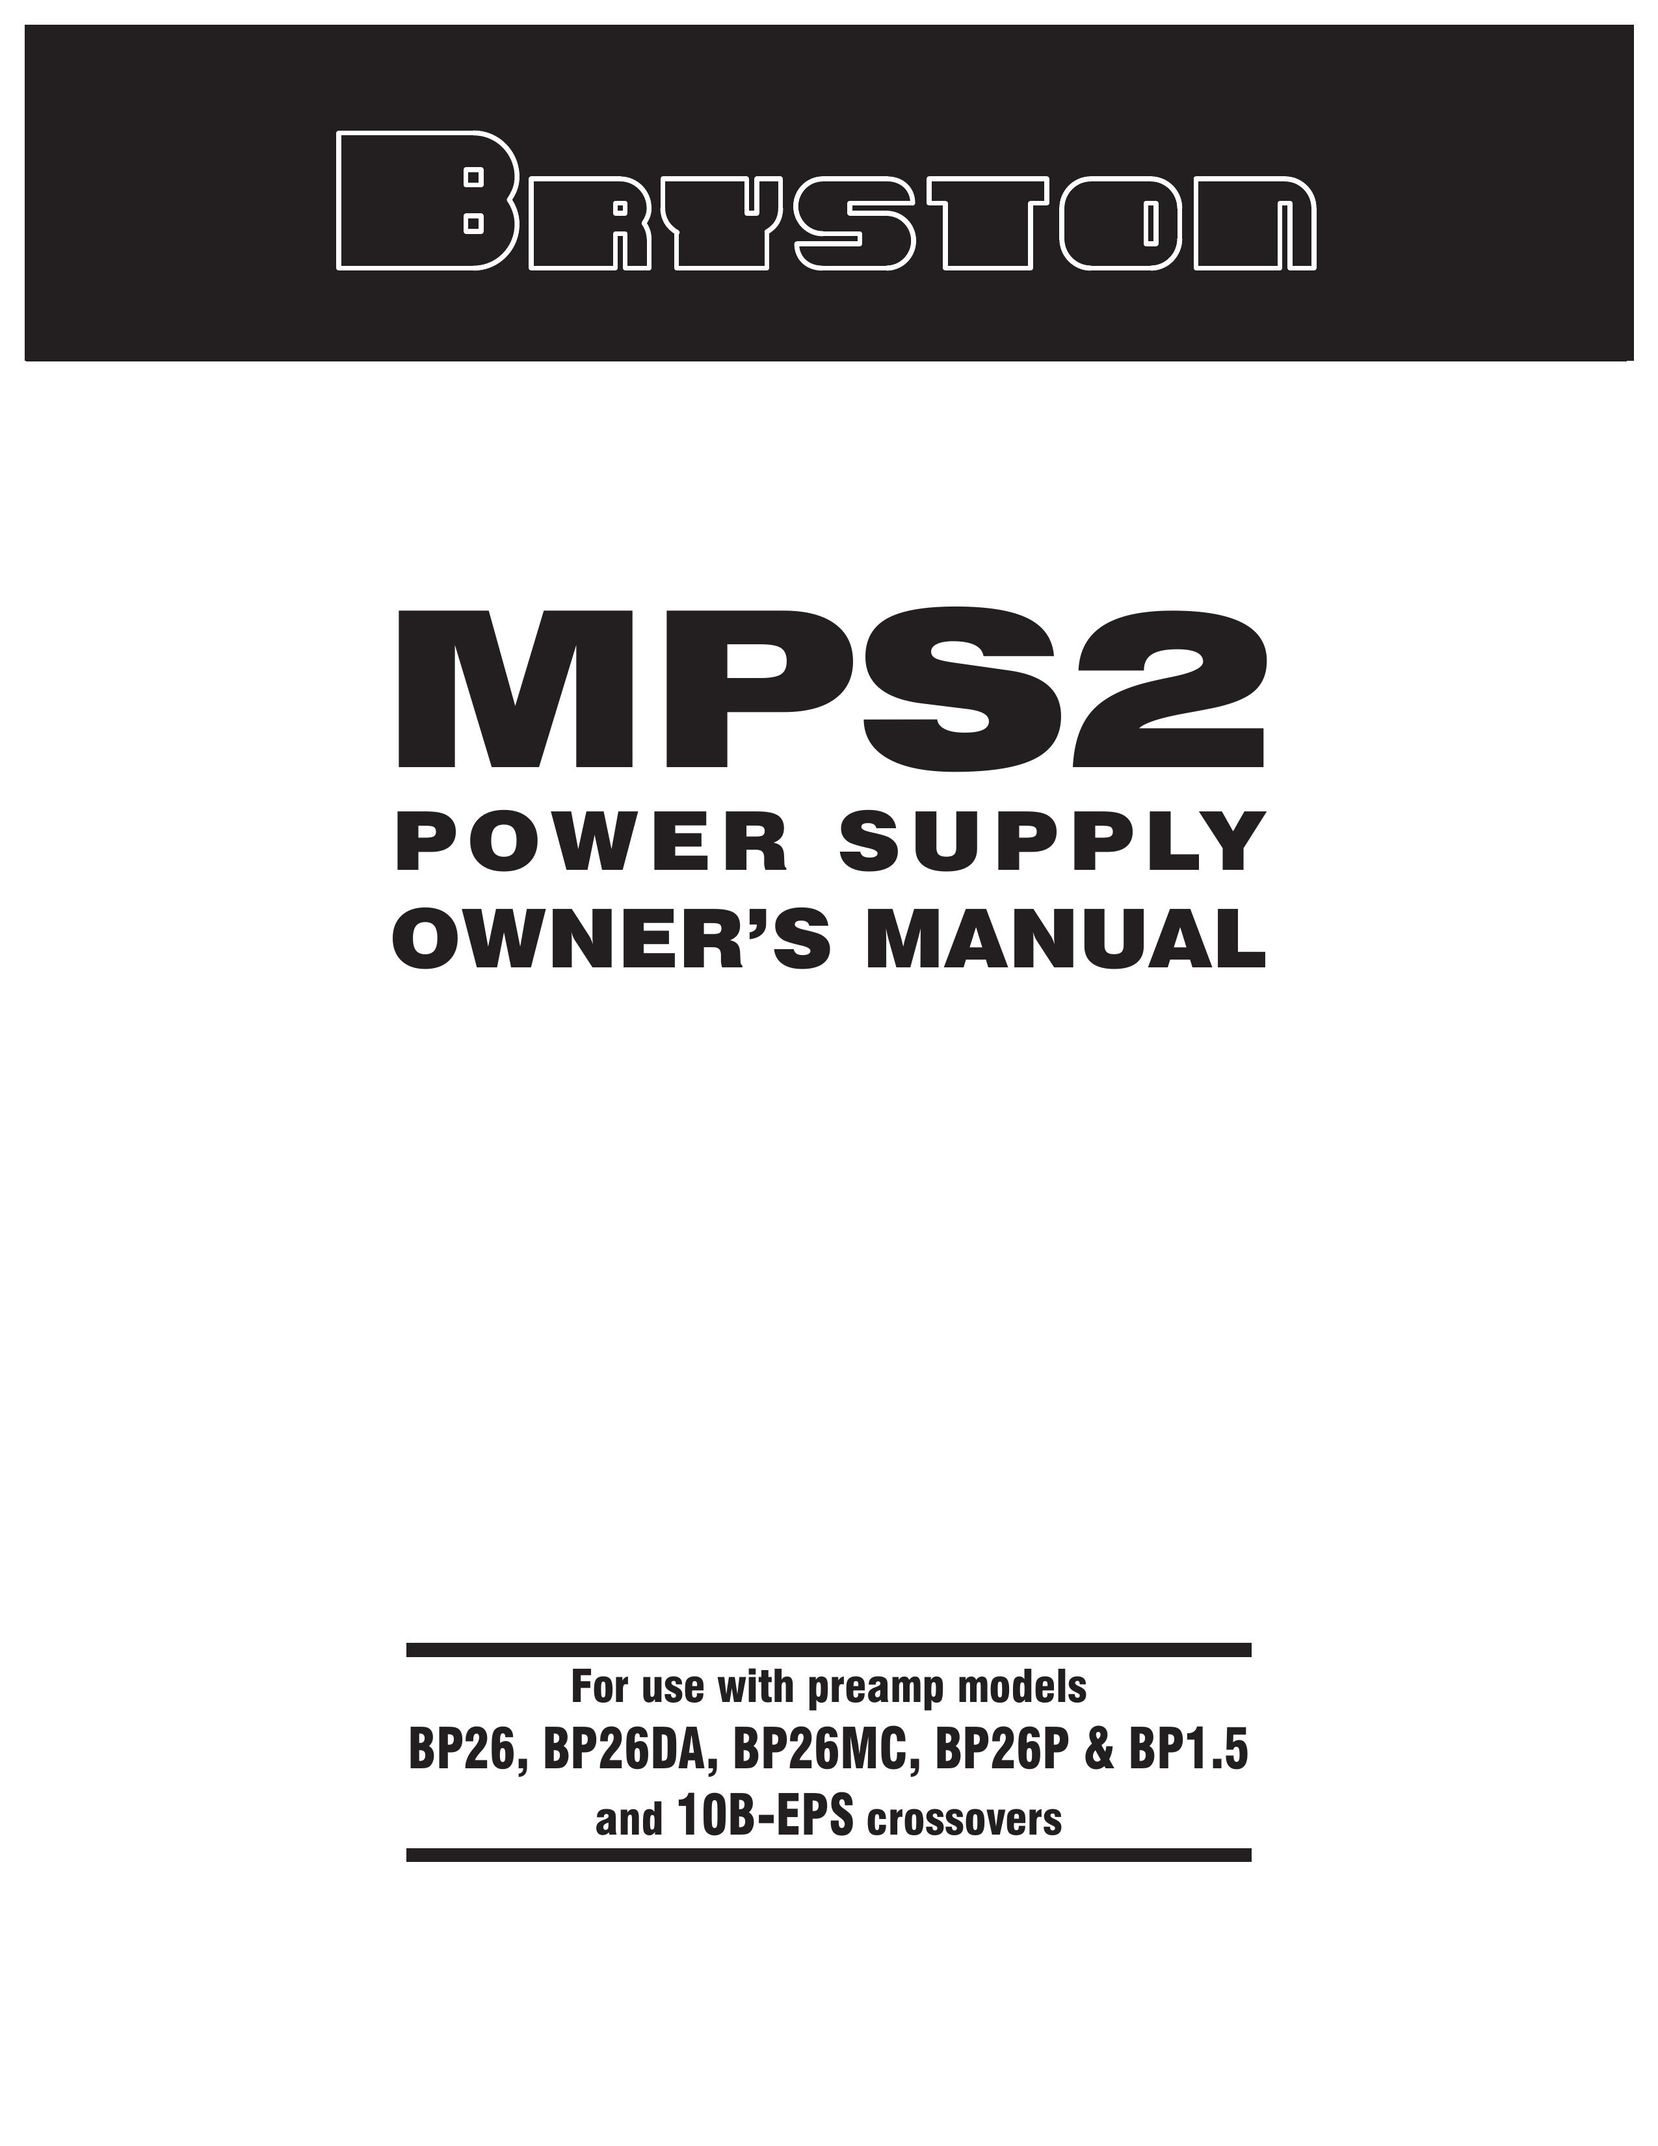 Bryston MPS2 Power Supply User Manual